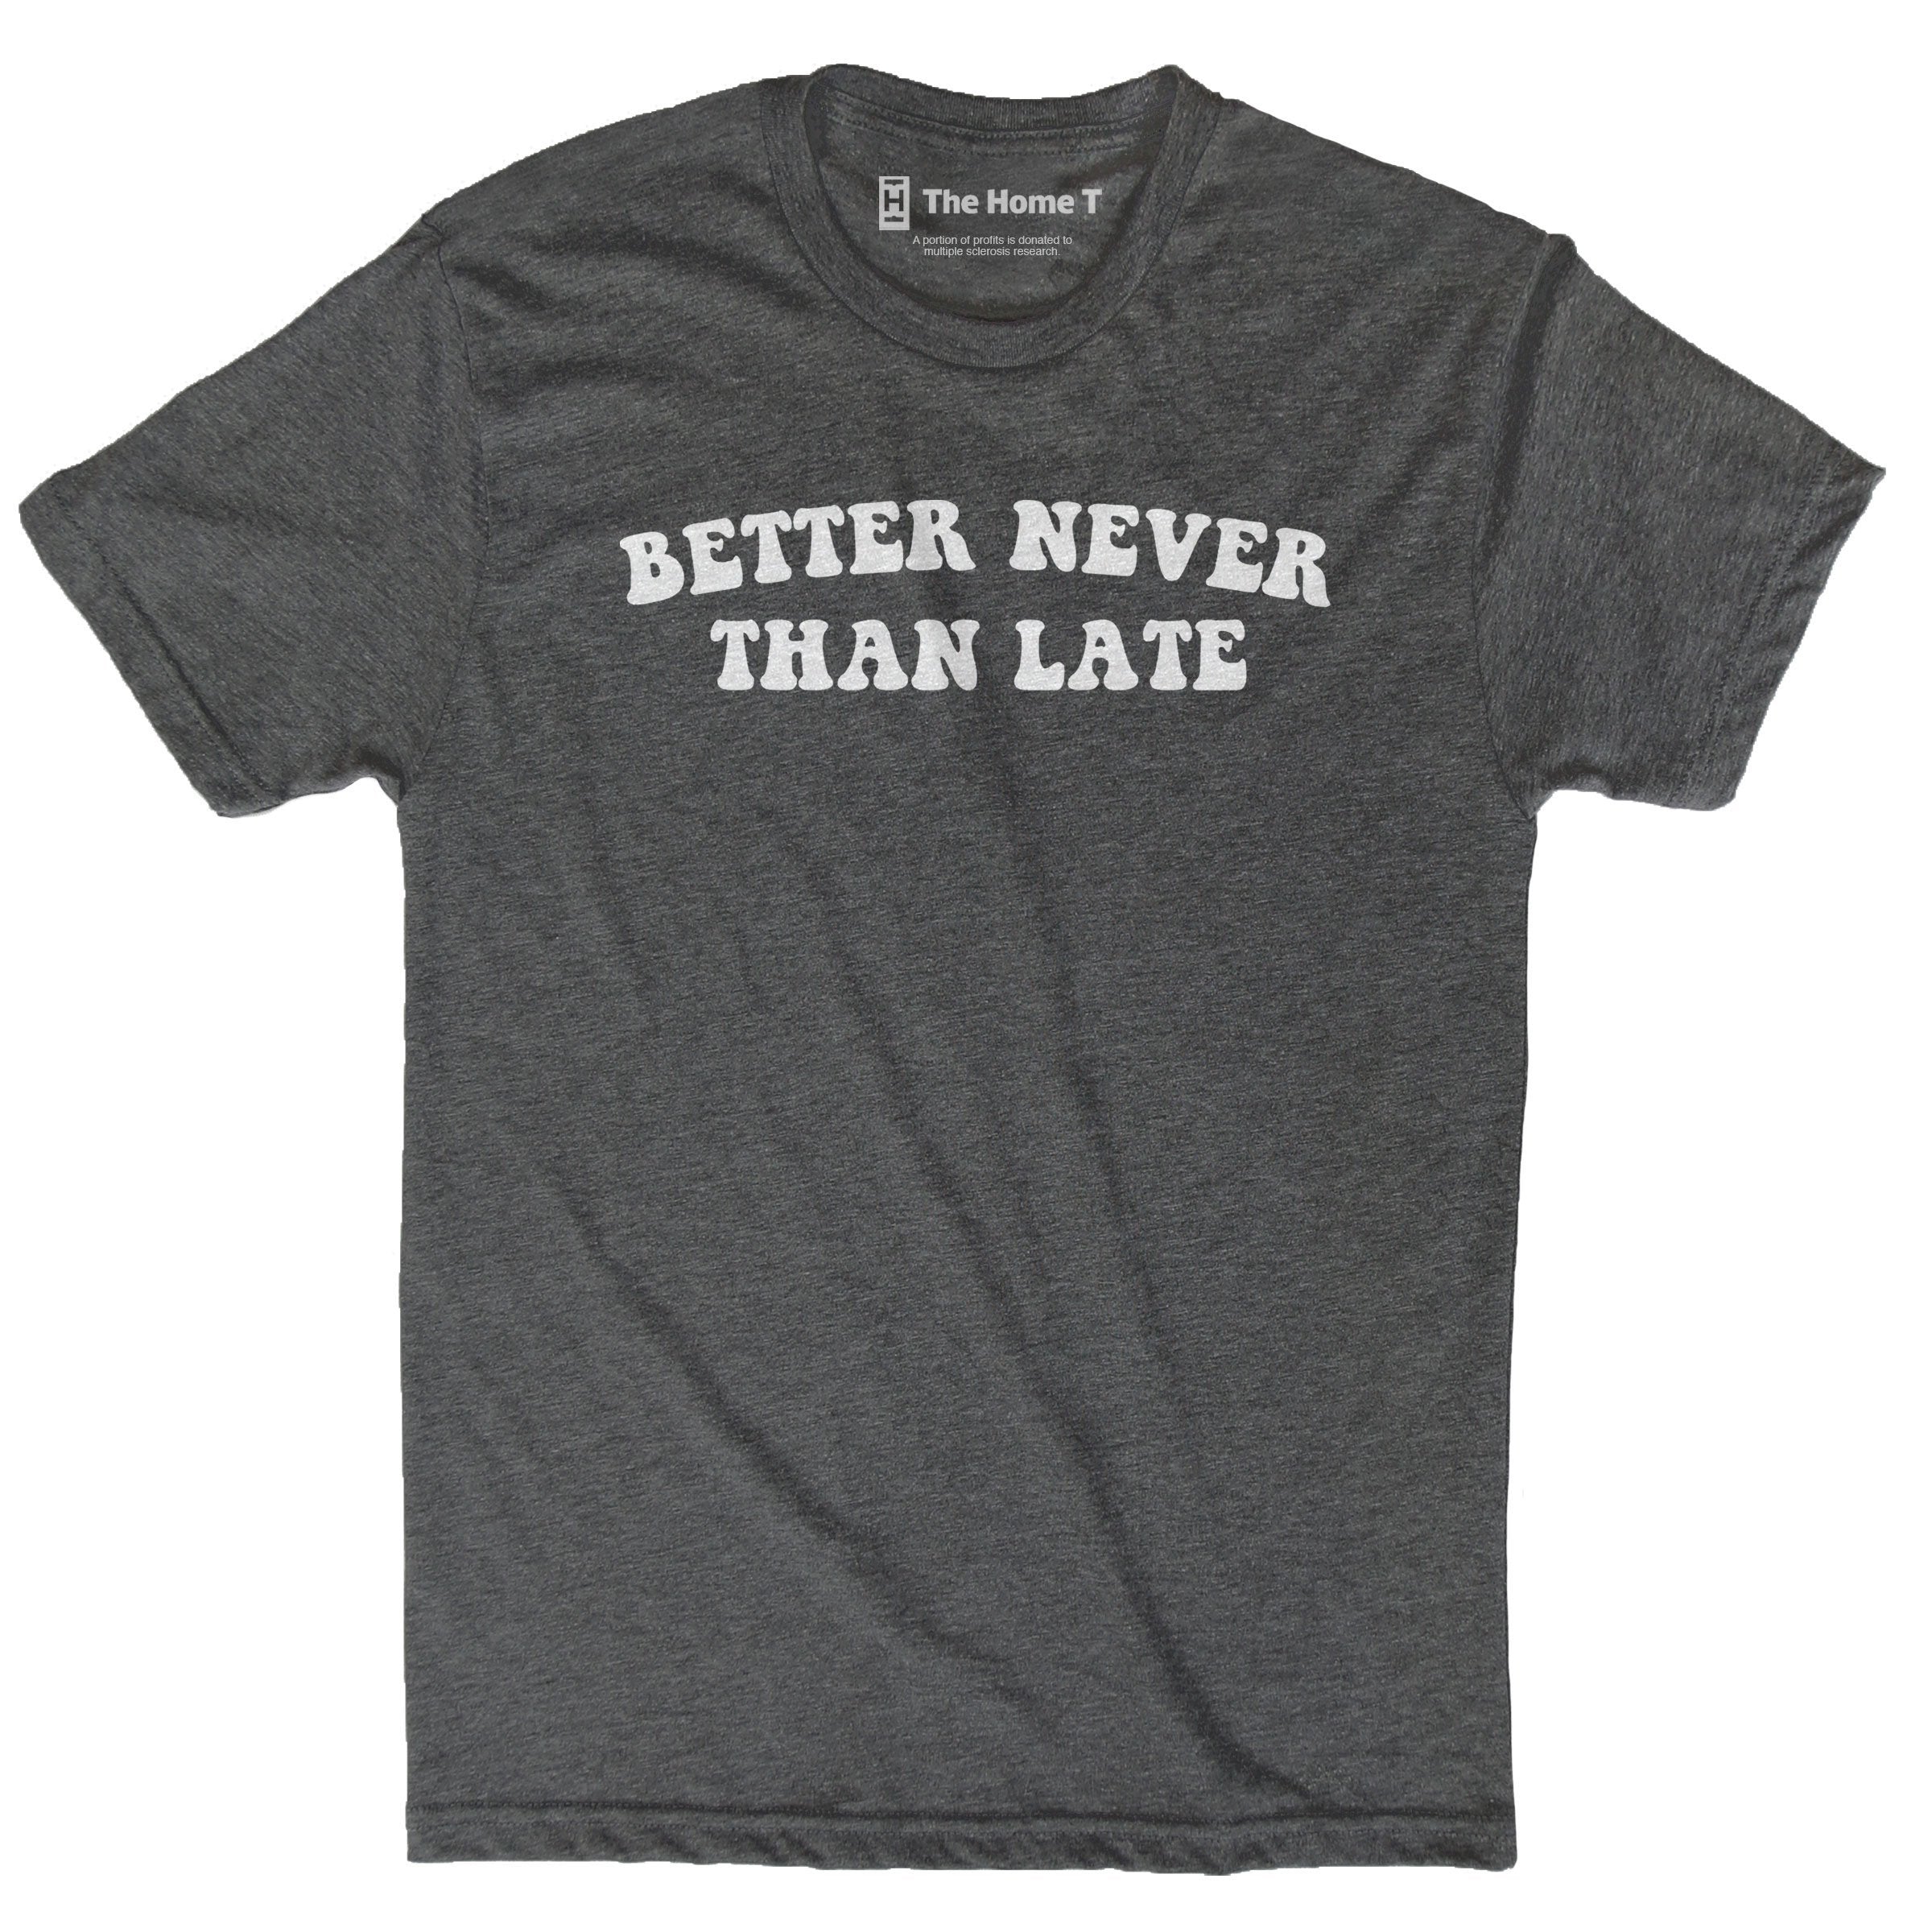 BETTER NEVER THAN LATE The Home T XS CREWNECK DARKGREY